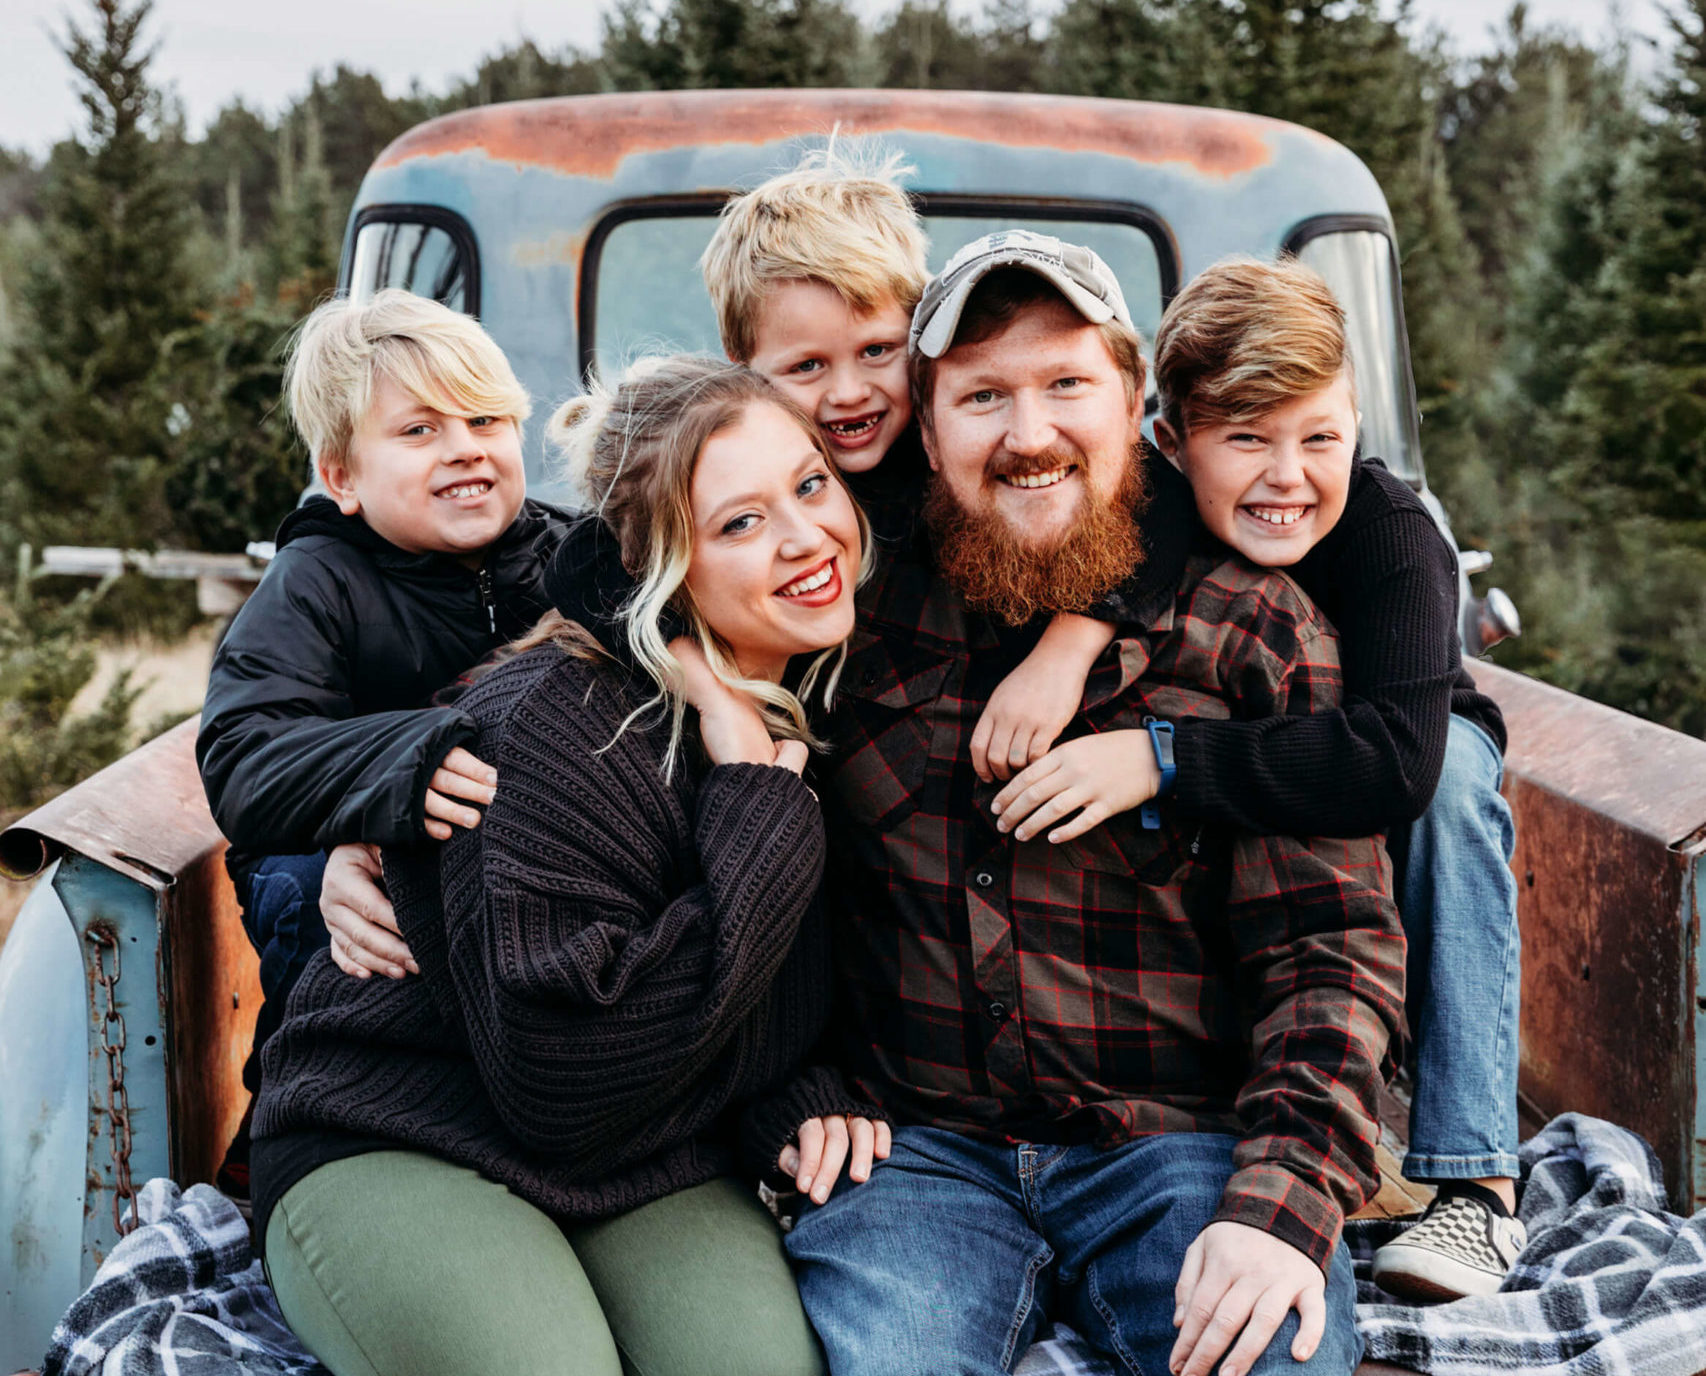 adorable family hugging each other in a vintage truck for blog post about spas in oshkosh